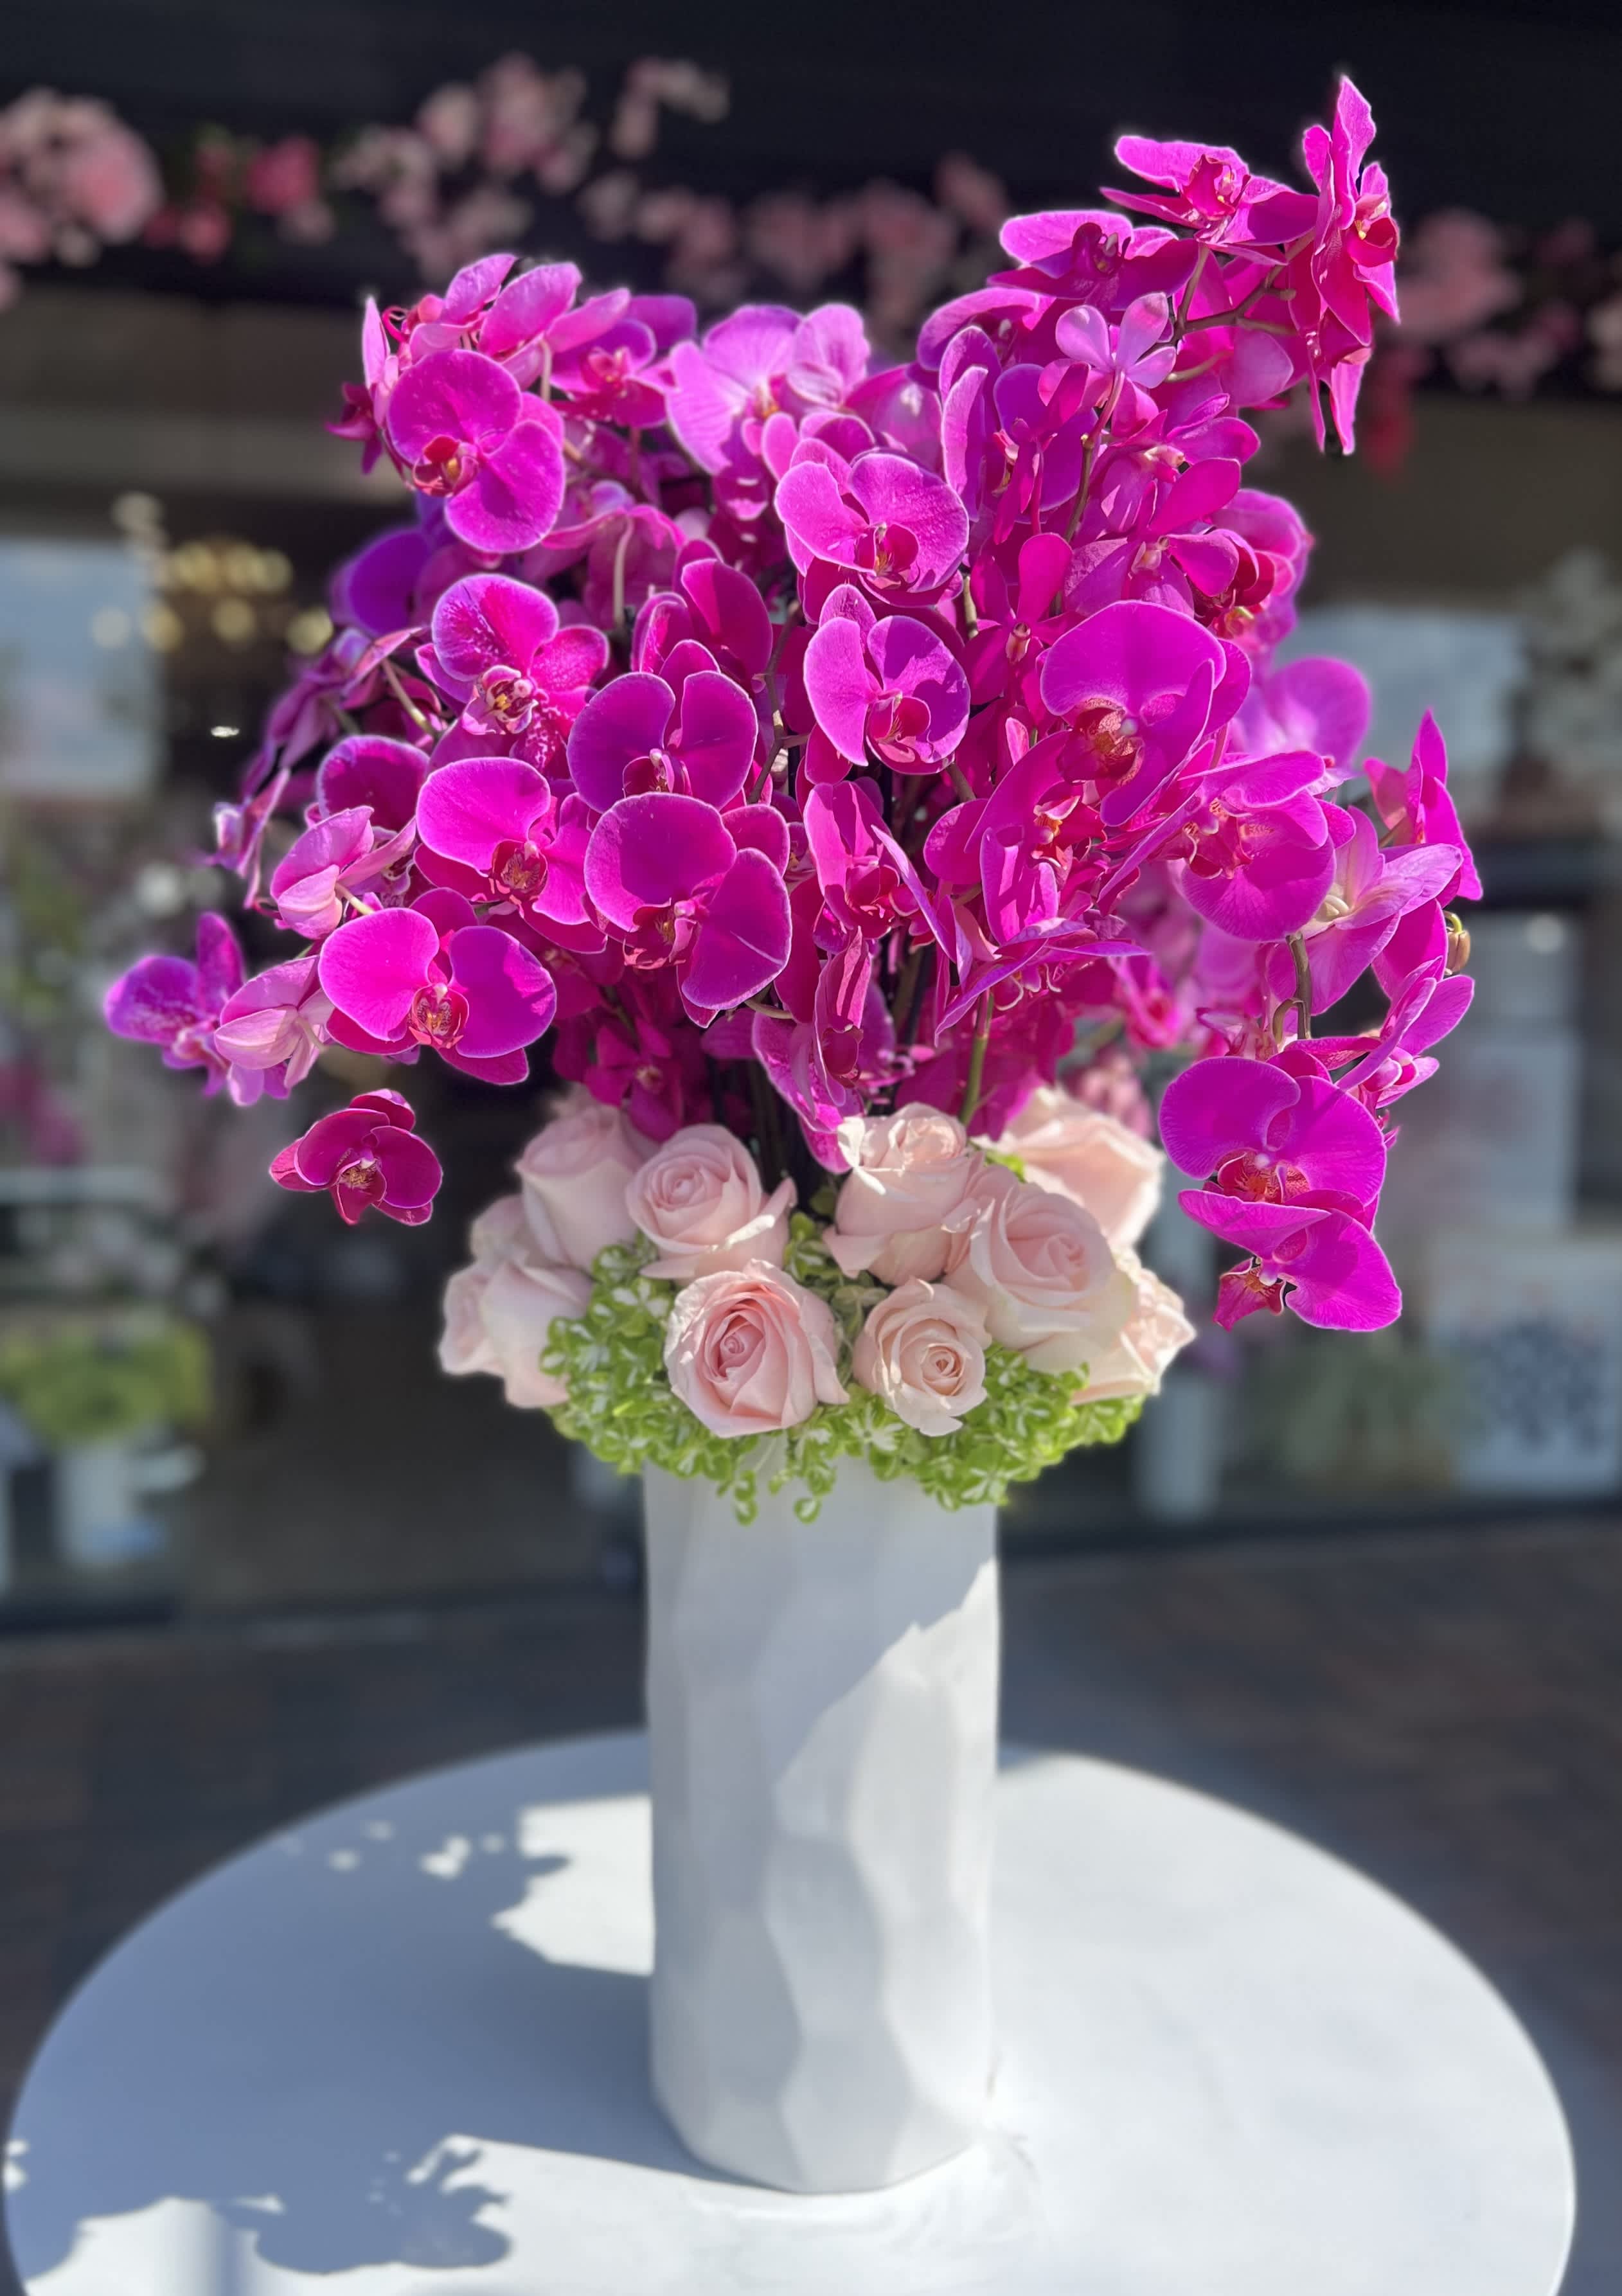 Breathtaking Orchid Bouquet  - Gorgeous  arrangement of orchids and roses in tall white ceramic vase 